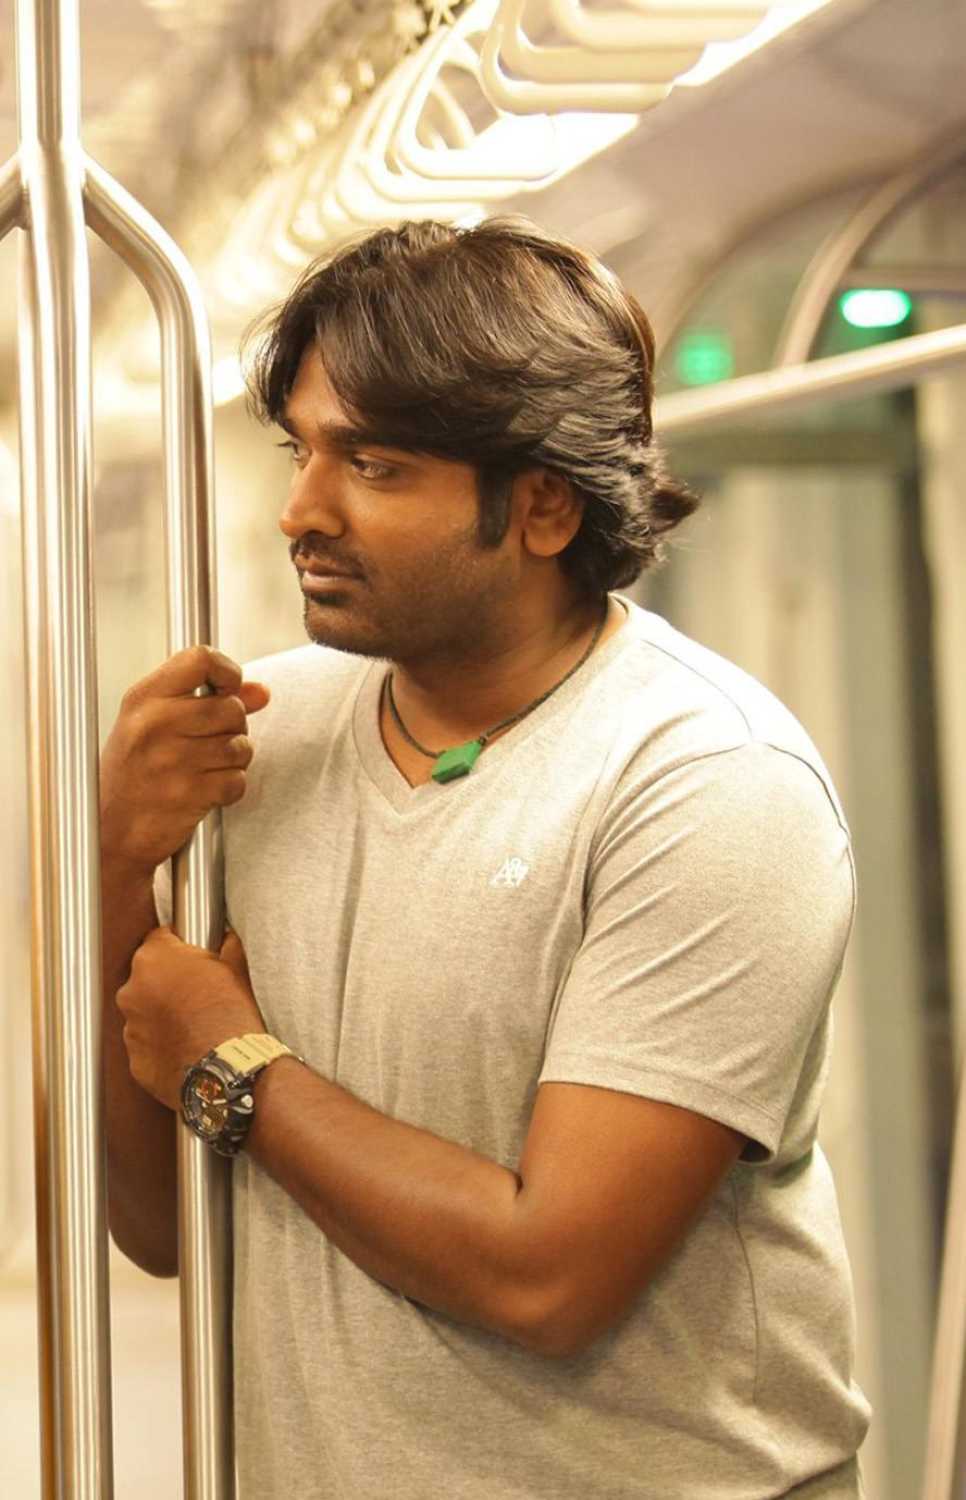 96 climax has a lip kiss scene according to script opened by vijay sethupathi after long years